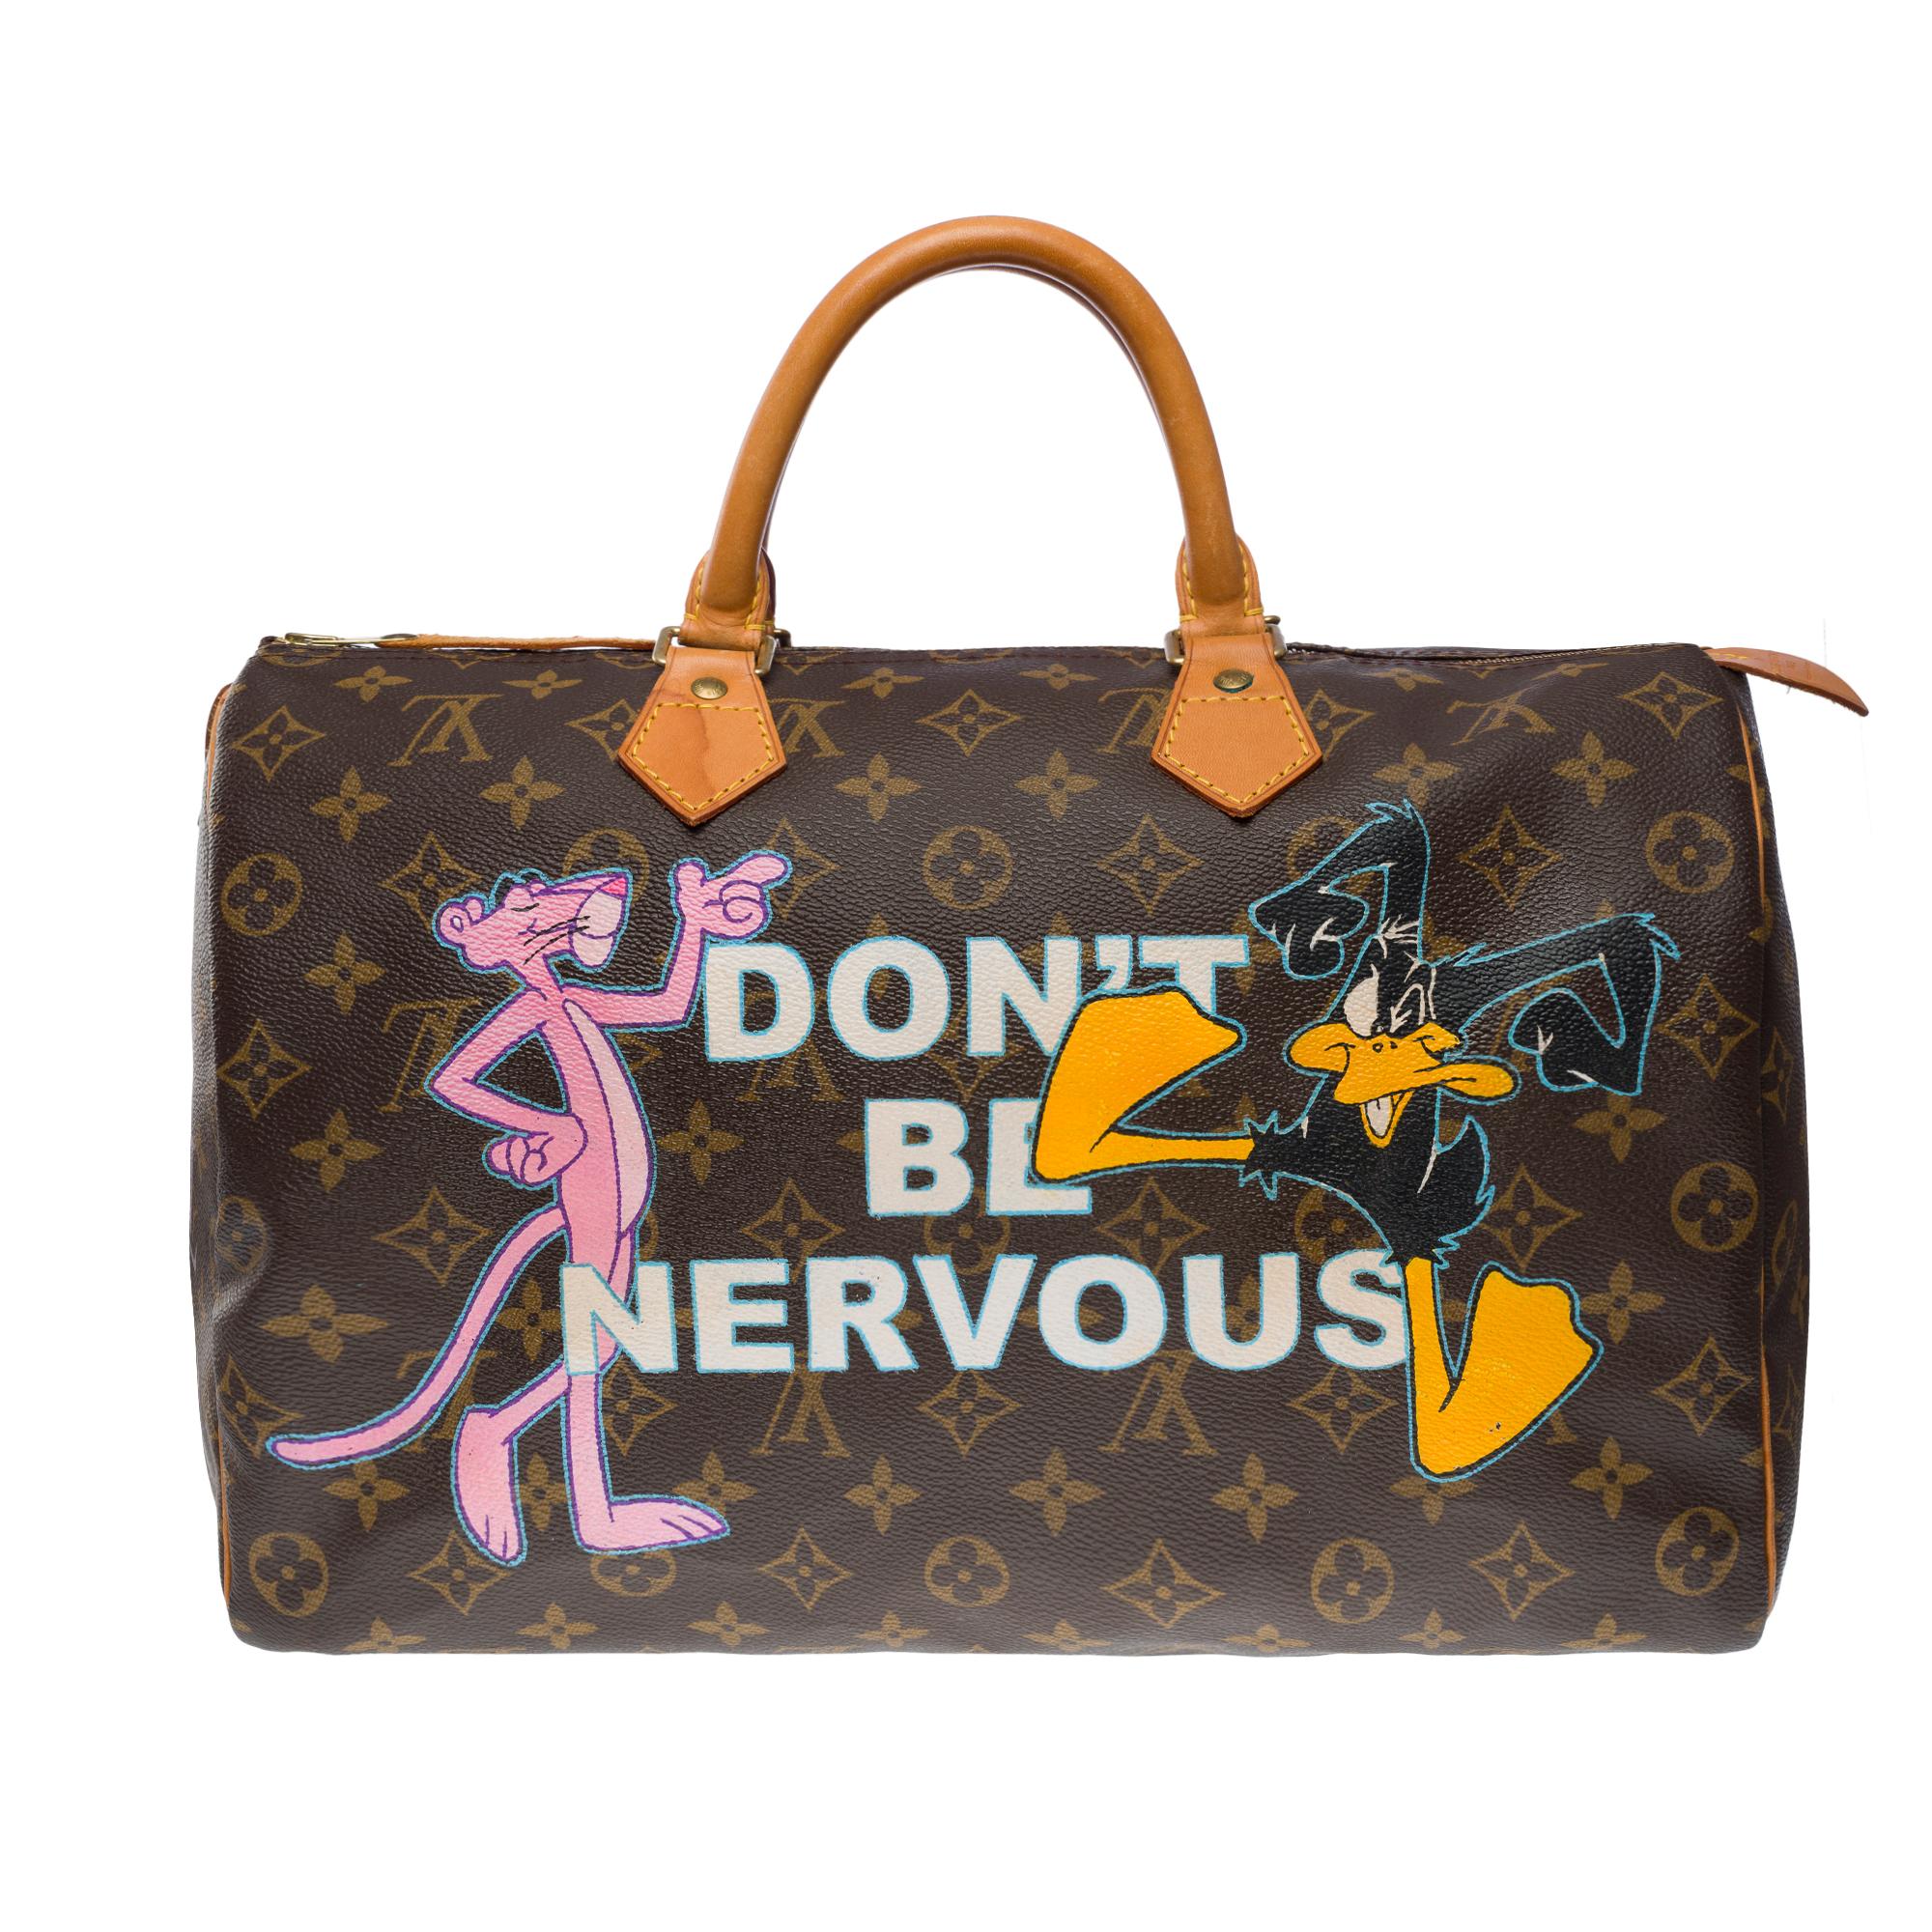 Louis Vuitton Speedy 35 handbag in brown Monogram canvas customized by the fashionable artist of Street Art PatBo with his work 